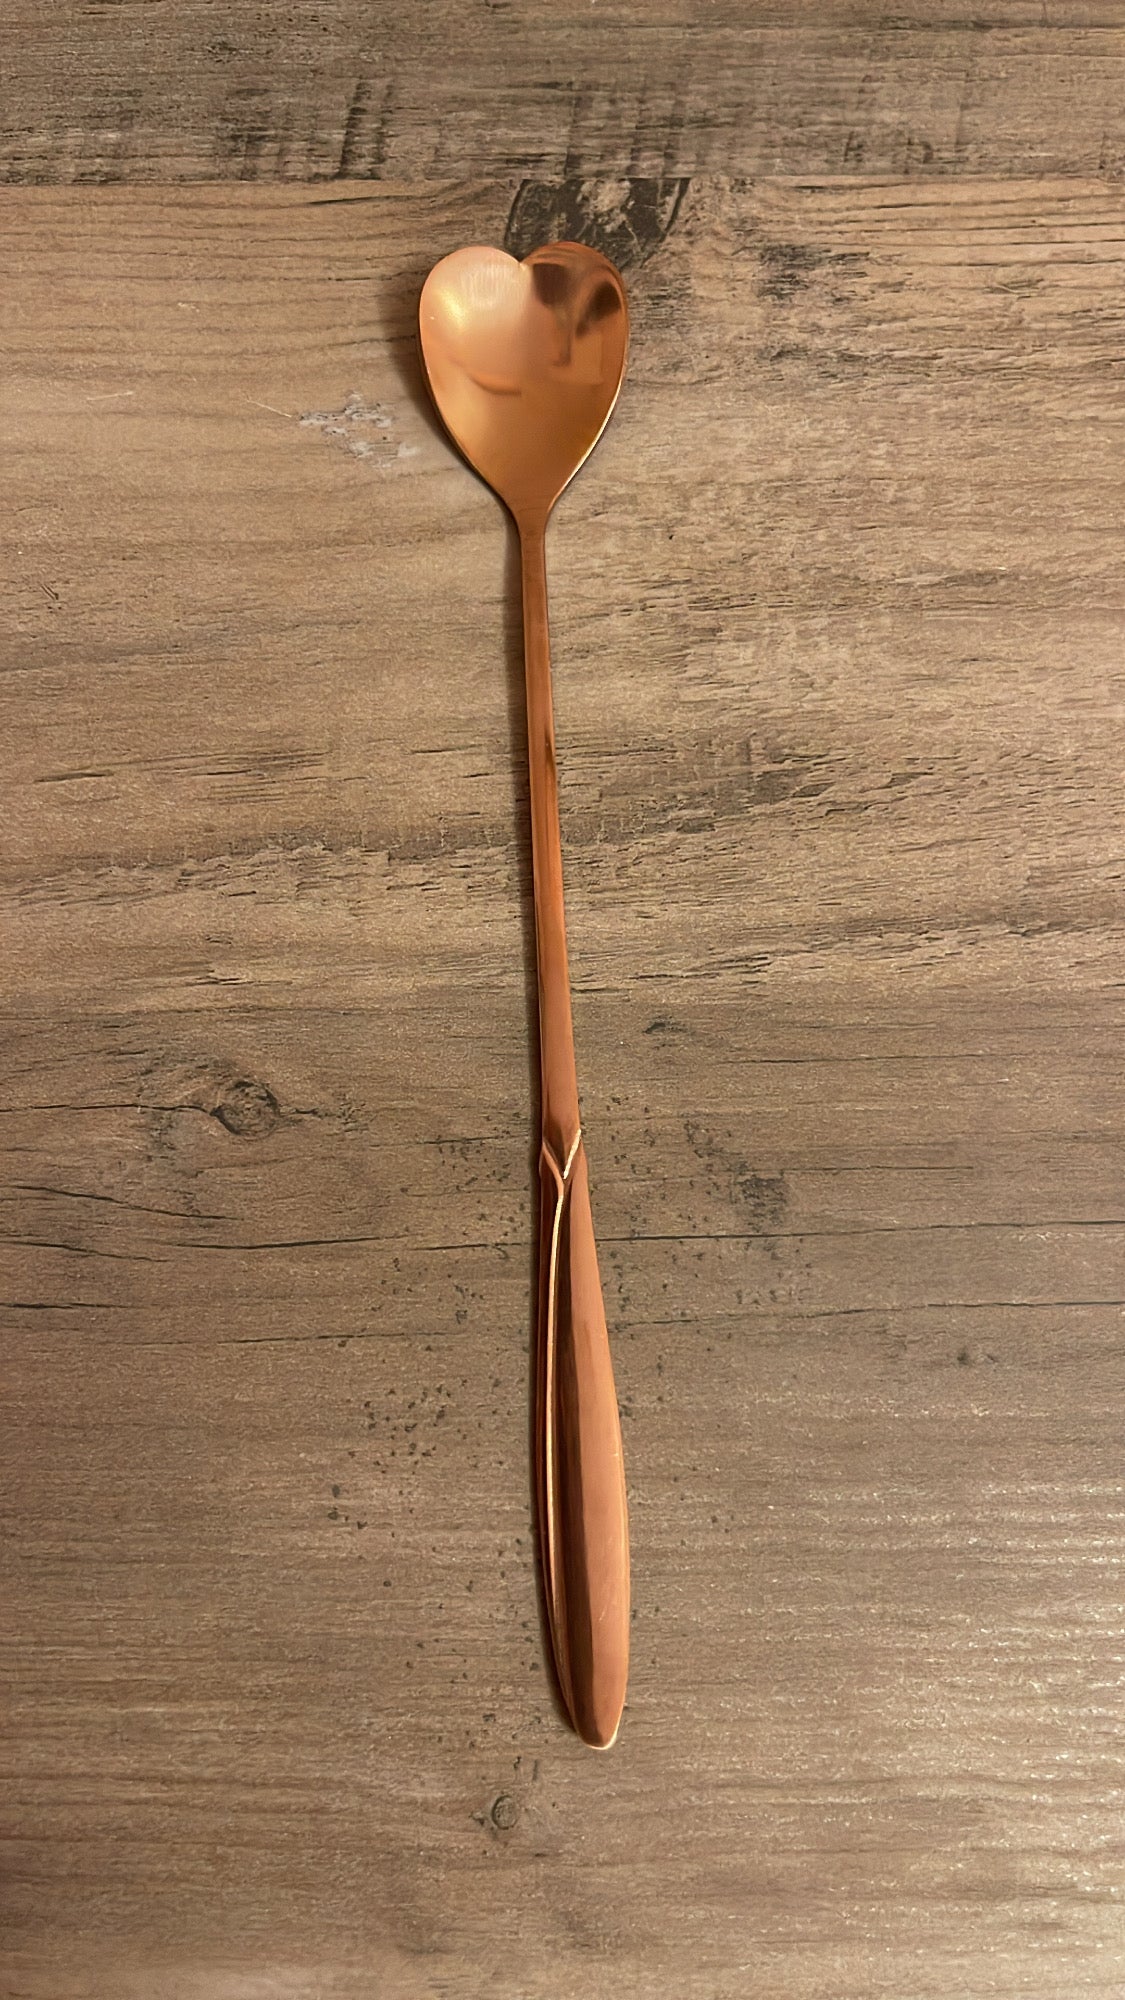 Rose gold heart-shaped spoon.